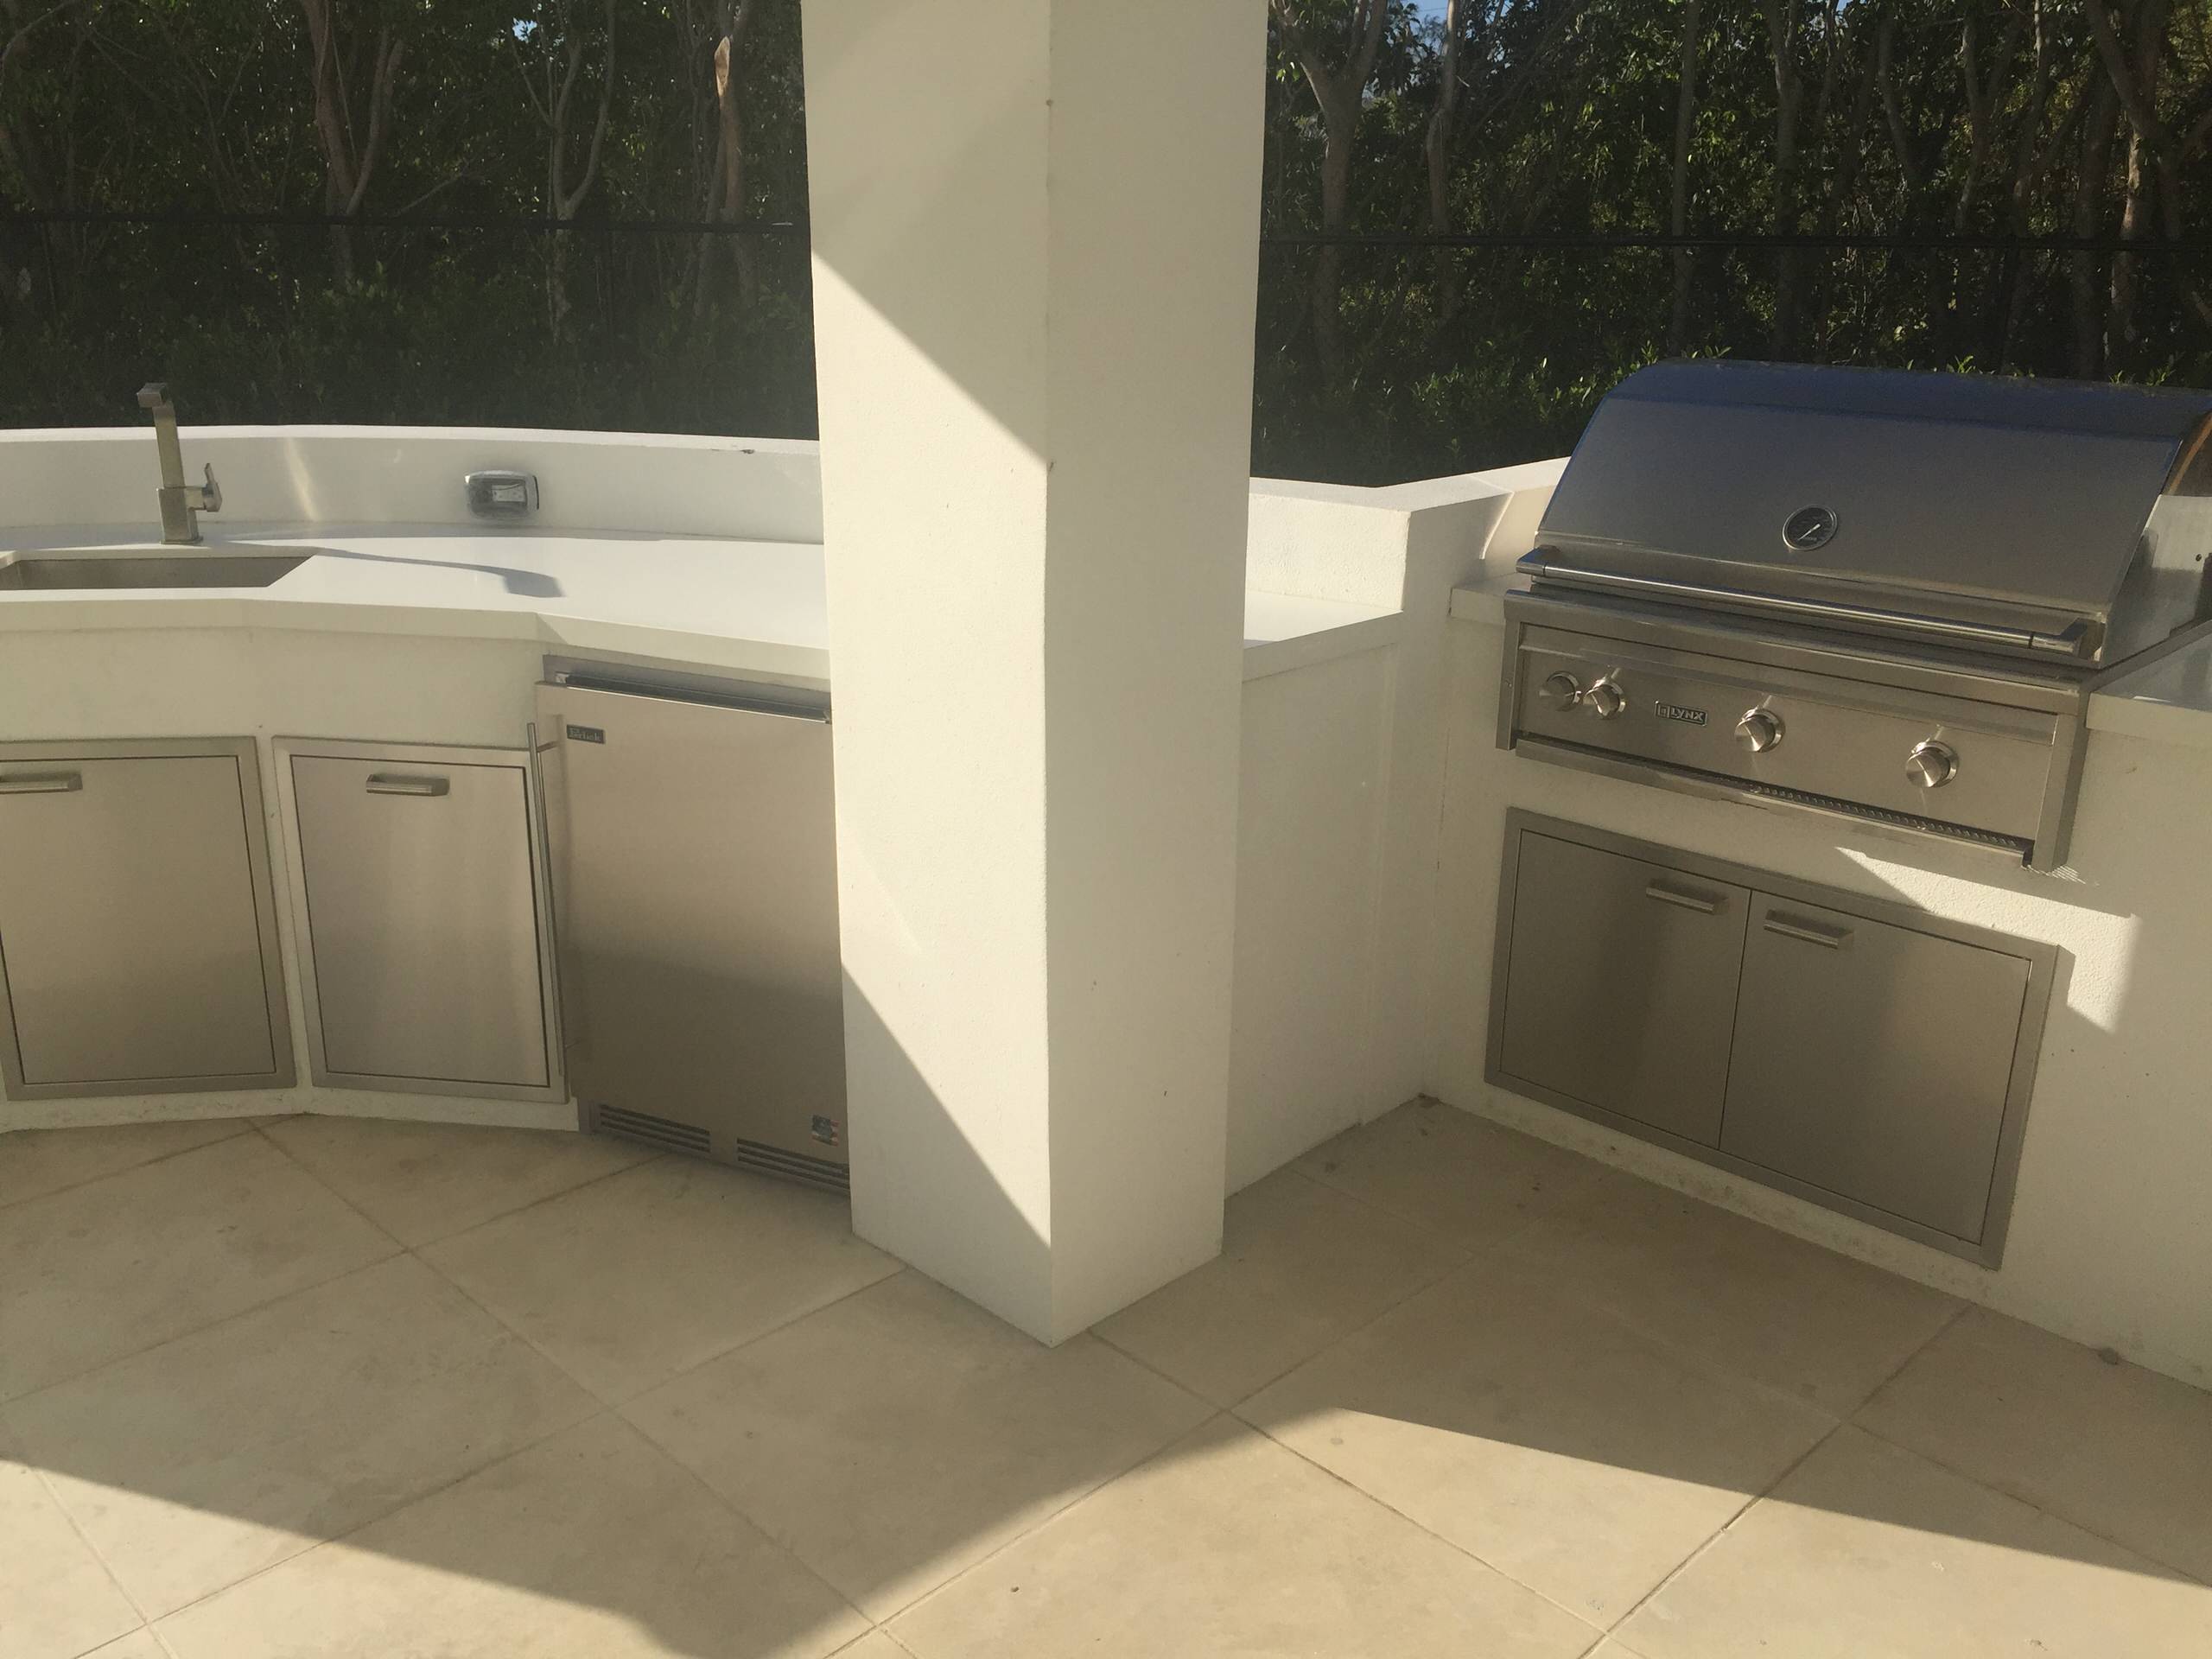 Island style backyard stone patio kitchen photo in Miami with a roof extension